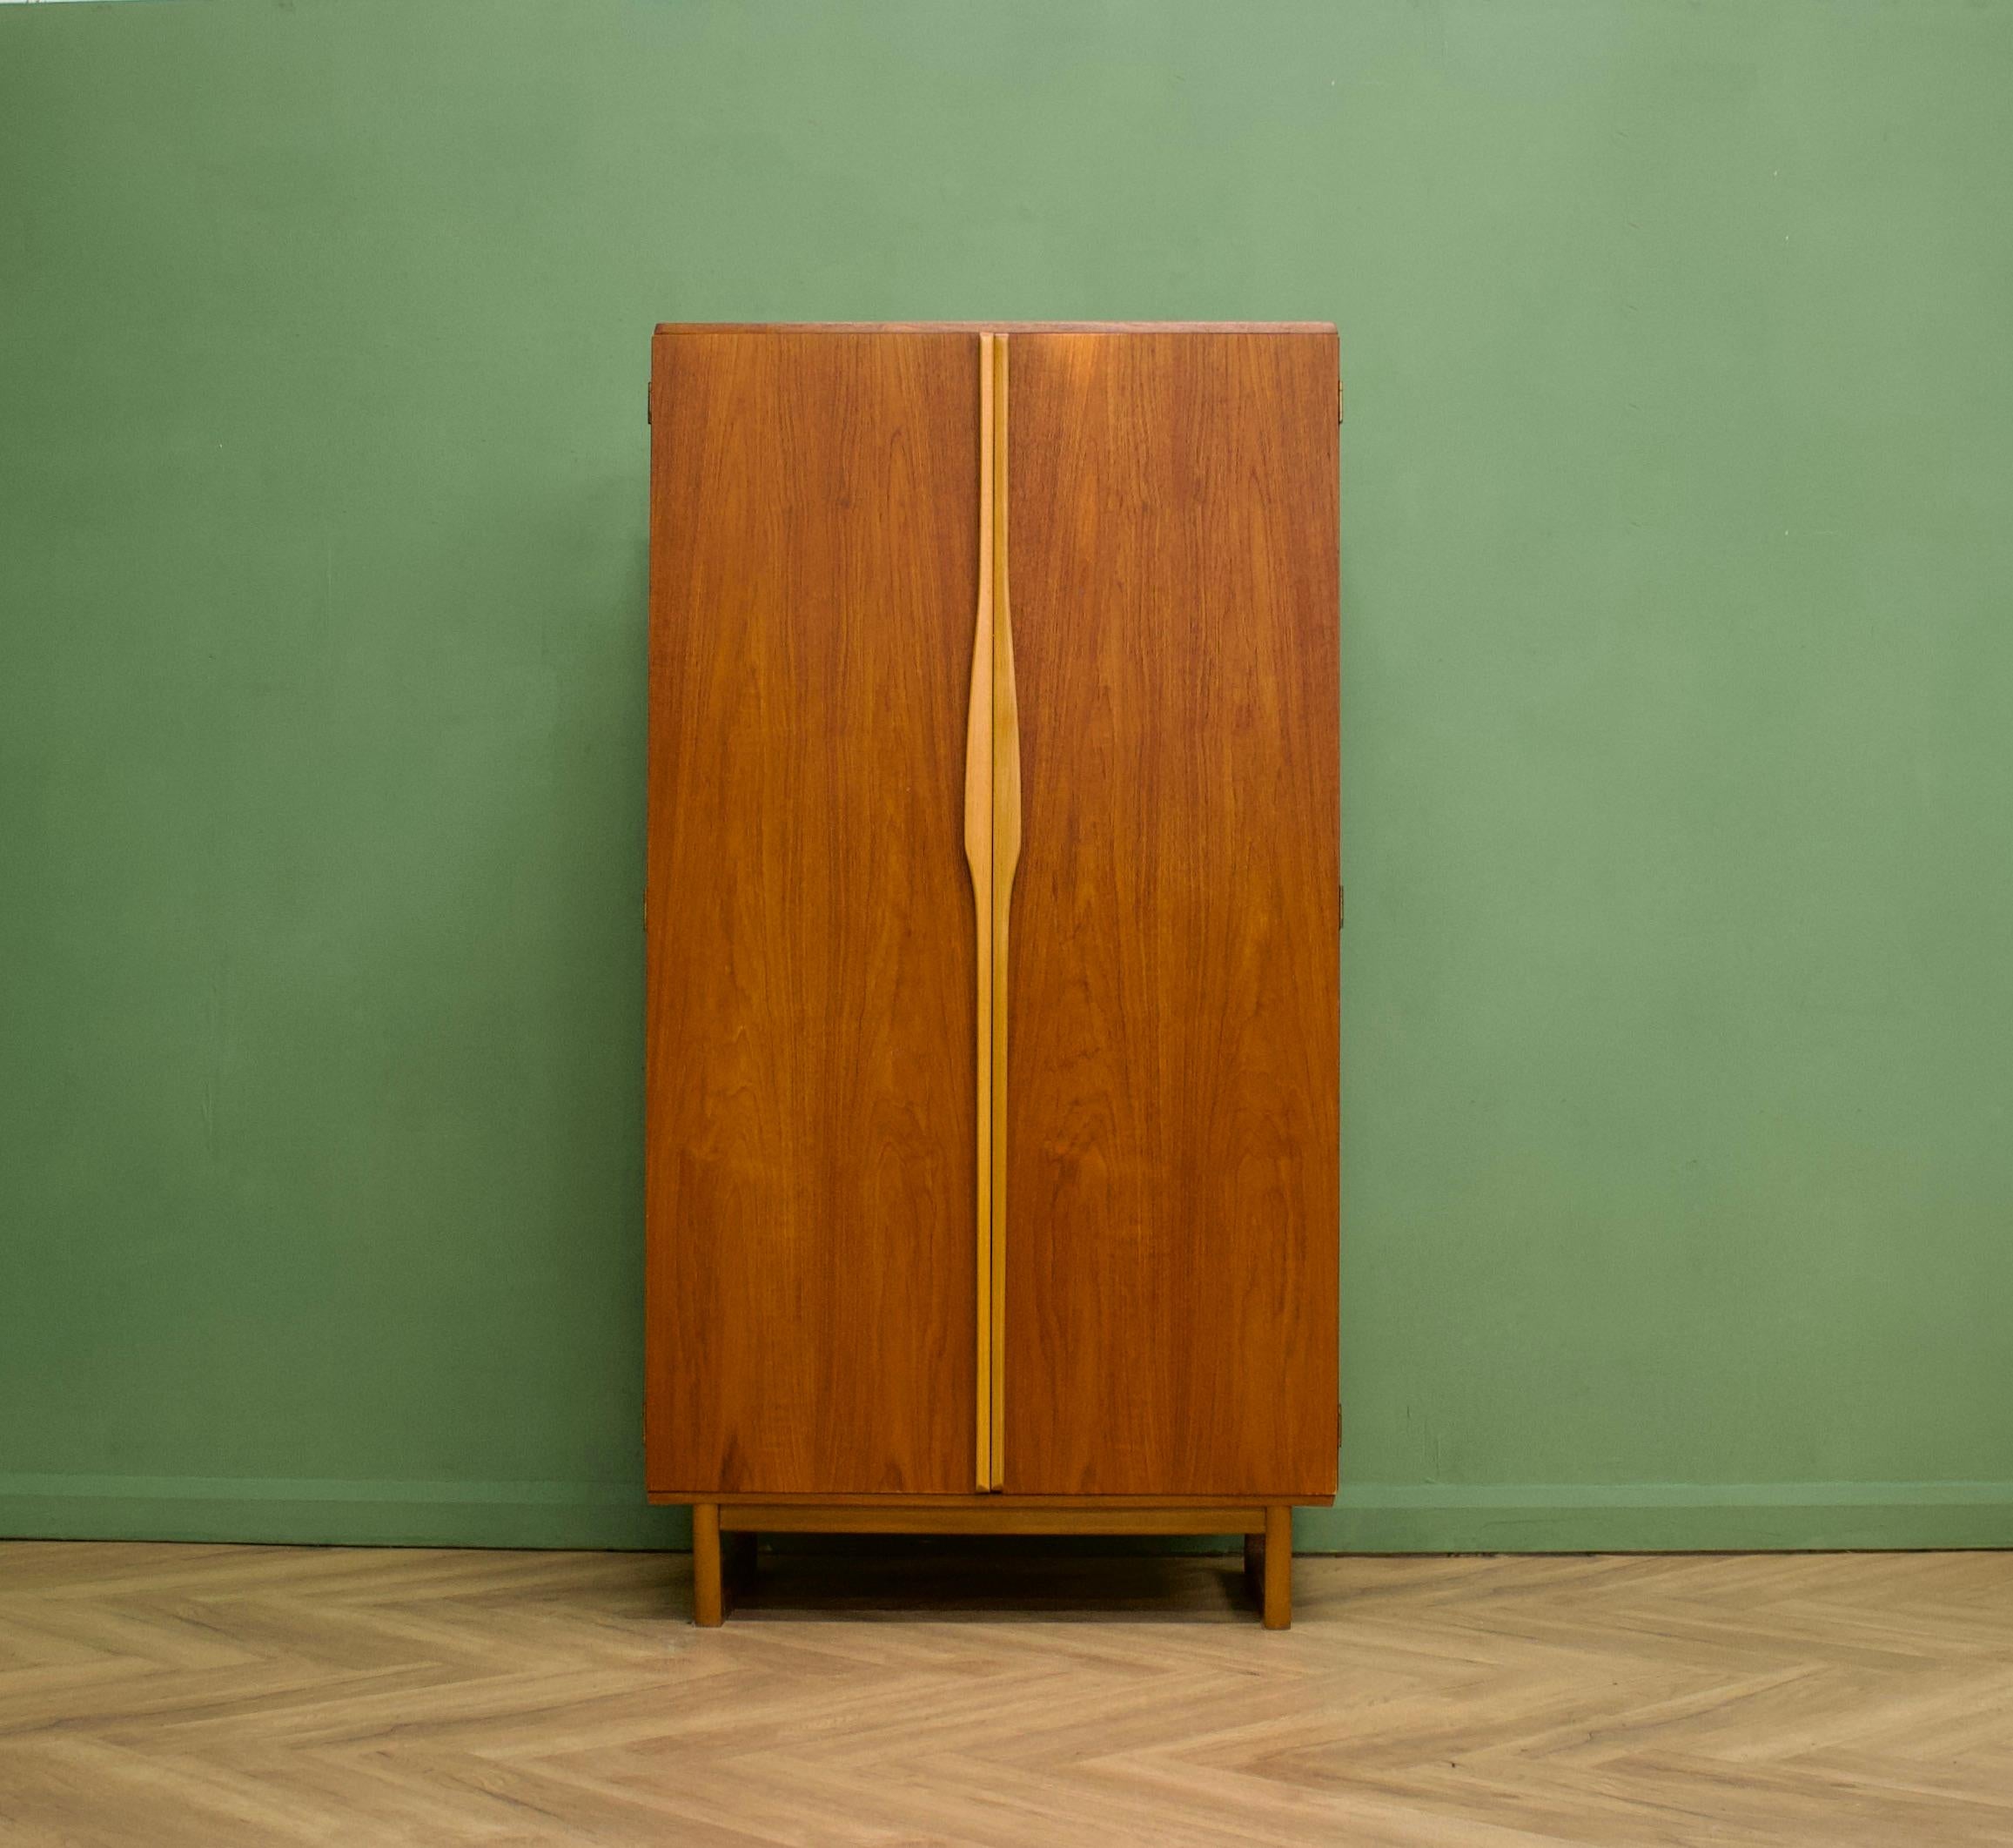 A freestanding two door teak wardrobe from Stonehill Furniture -  in the Danish modern style
Made during the 1960s


Fitted out with a clothes rail to one side, shelves and a compartment to the other


This wardrobe flat packs


The matching larger